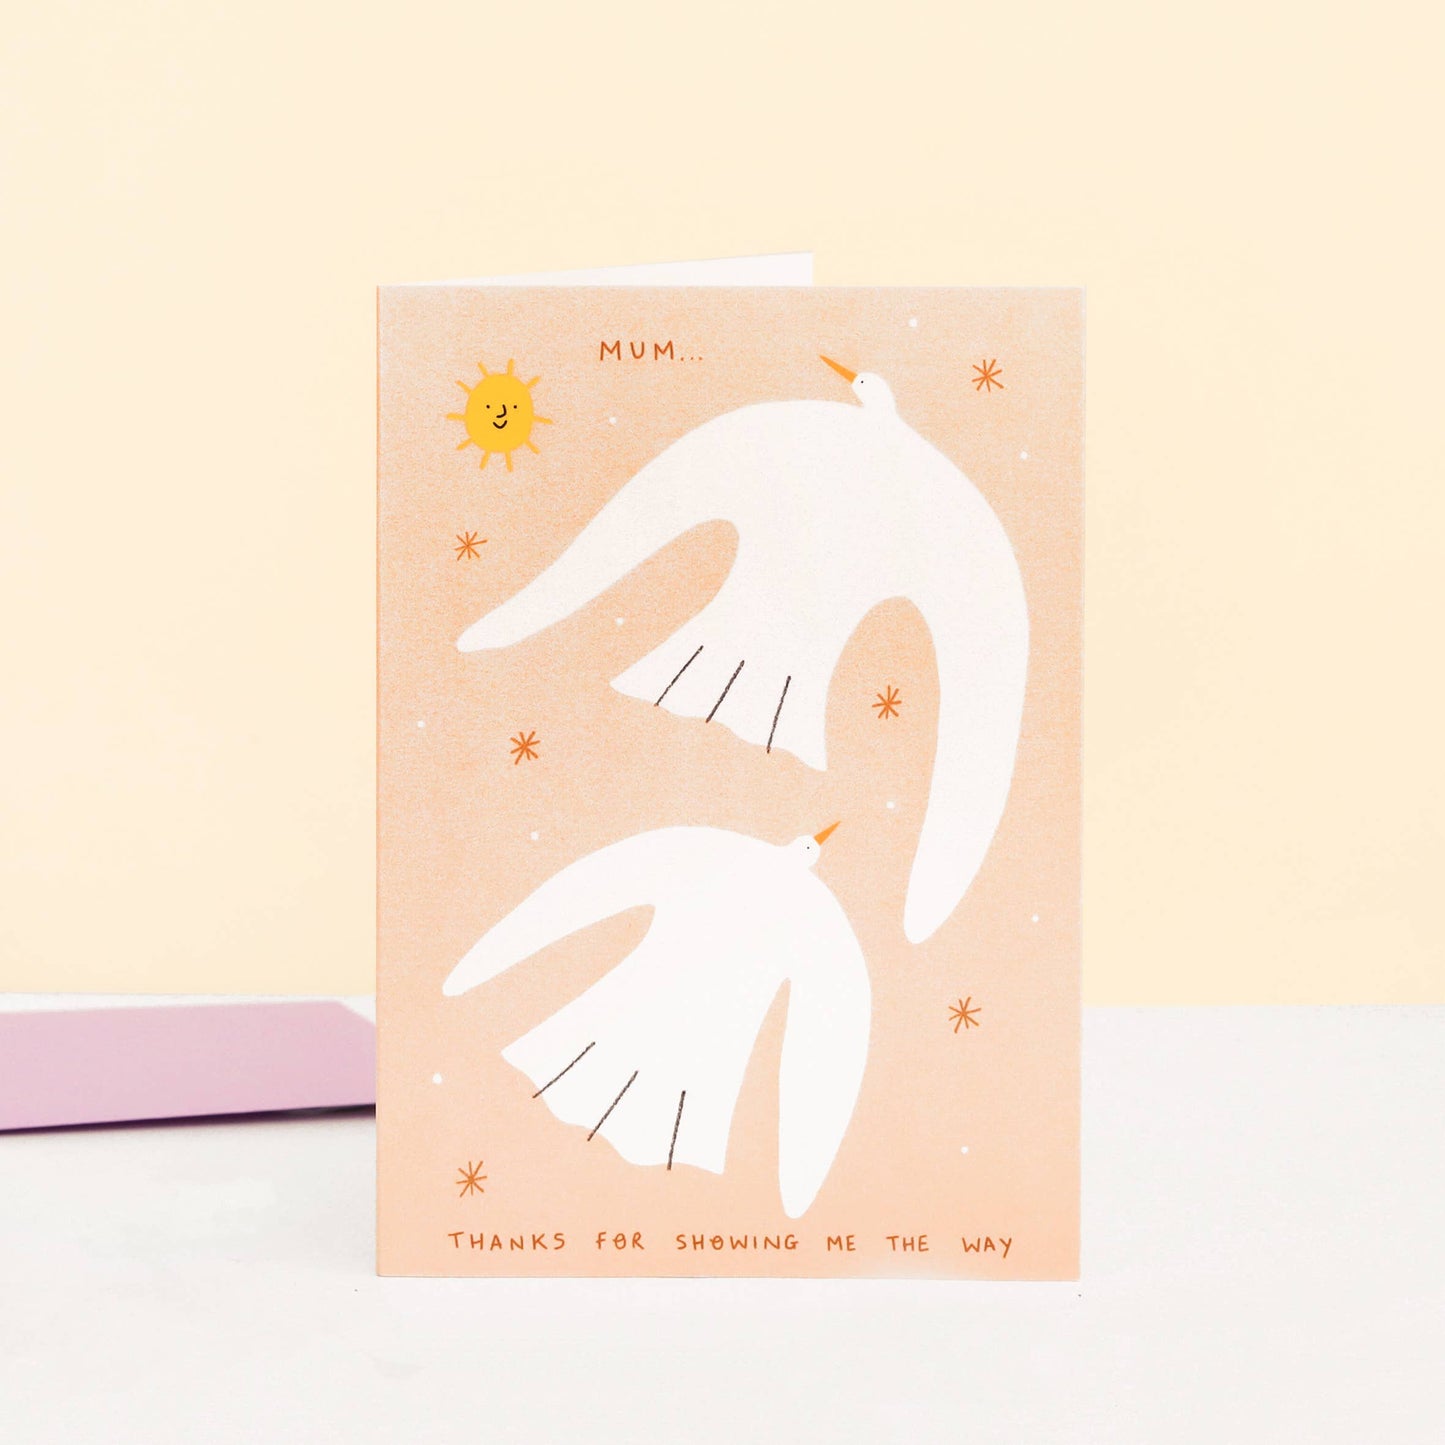 Little Black Cat Illustrated Goods - Mum, Thanks For Showing Me The Way Card | Mother’s Day Card